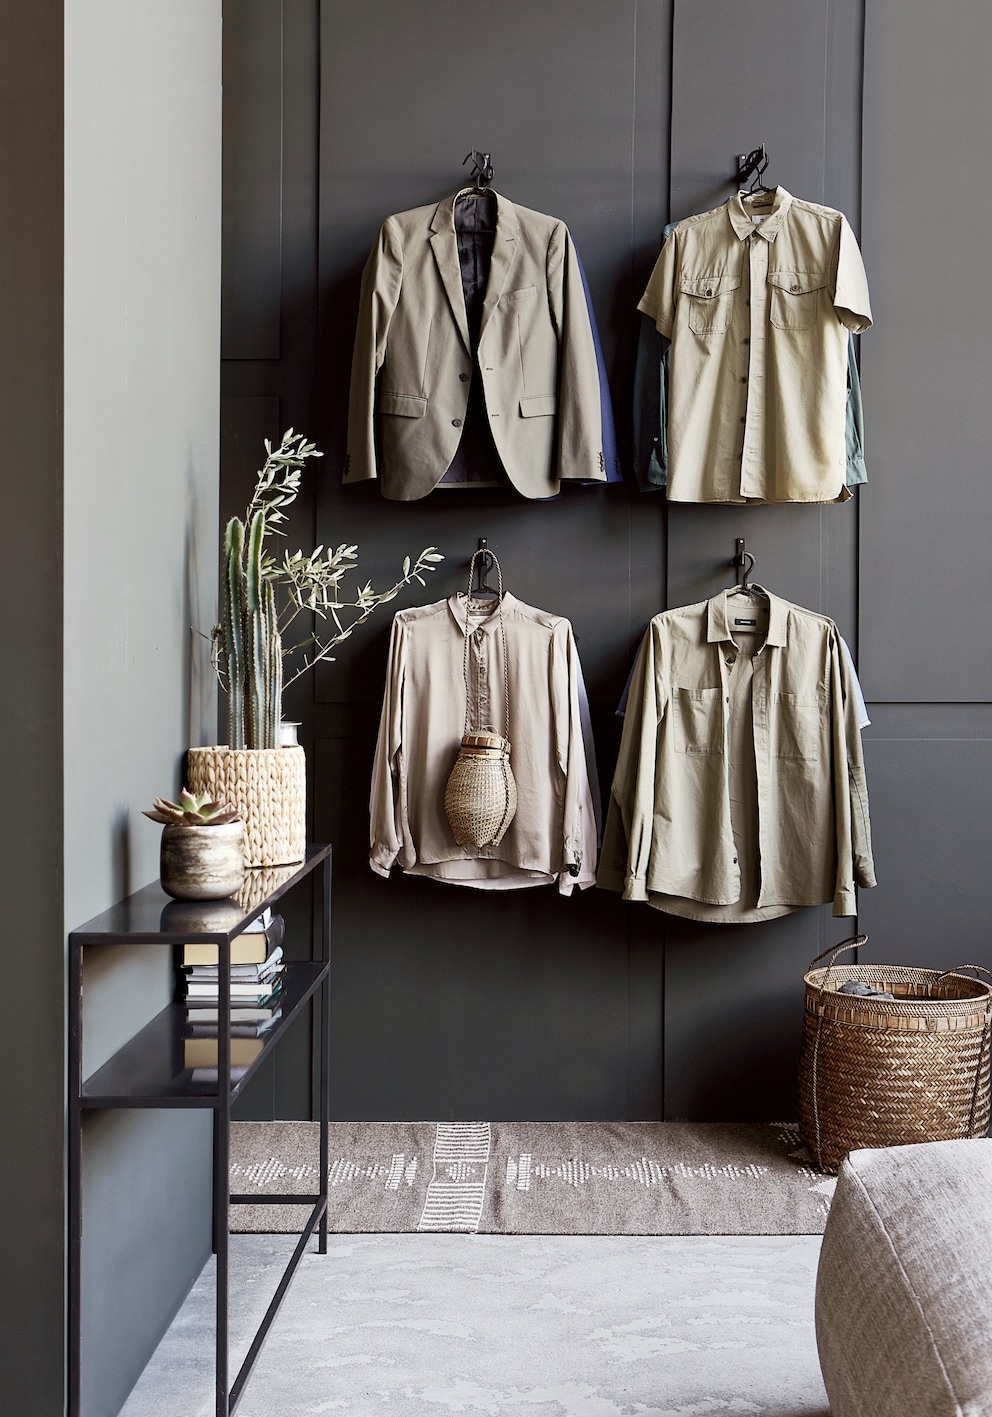 These light-coloured garments really come into their own when contrasted with a dark-coloured wall.